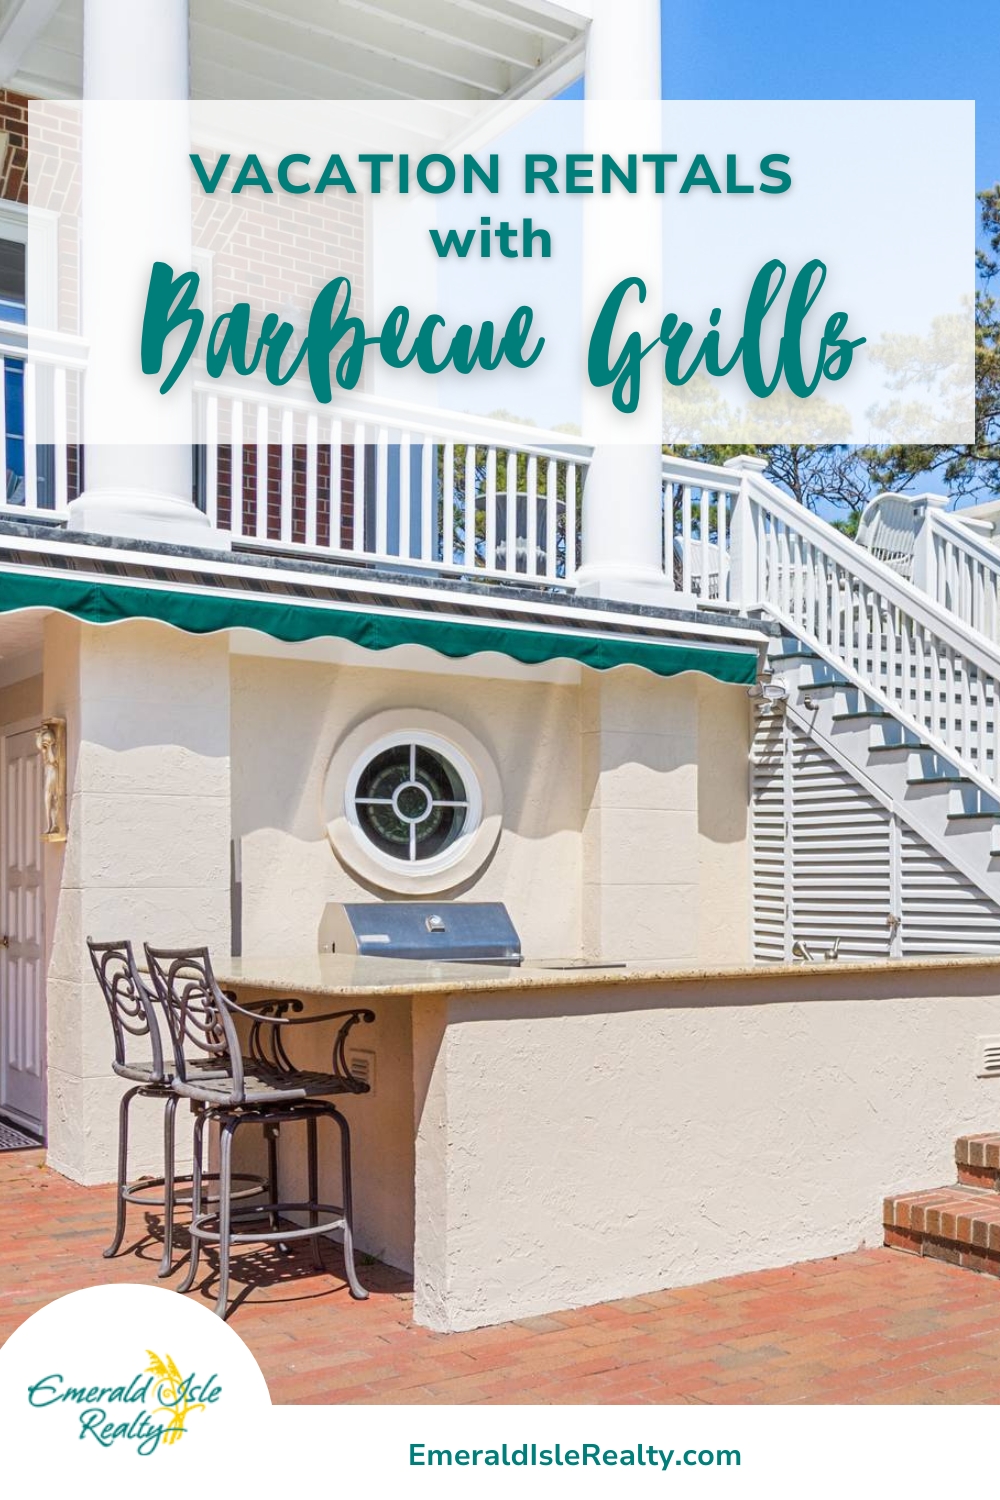 Vacation Rentals with Barbecue Grills in Emerald Isle, NC